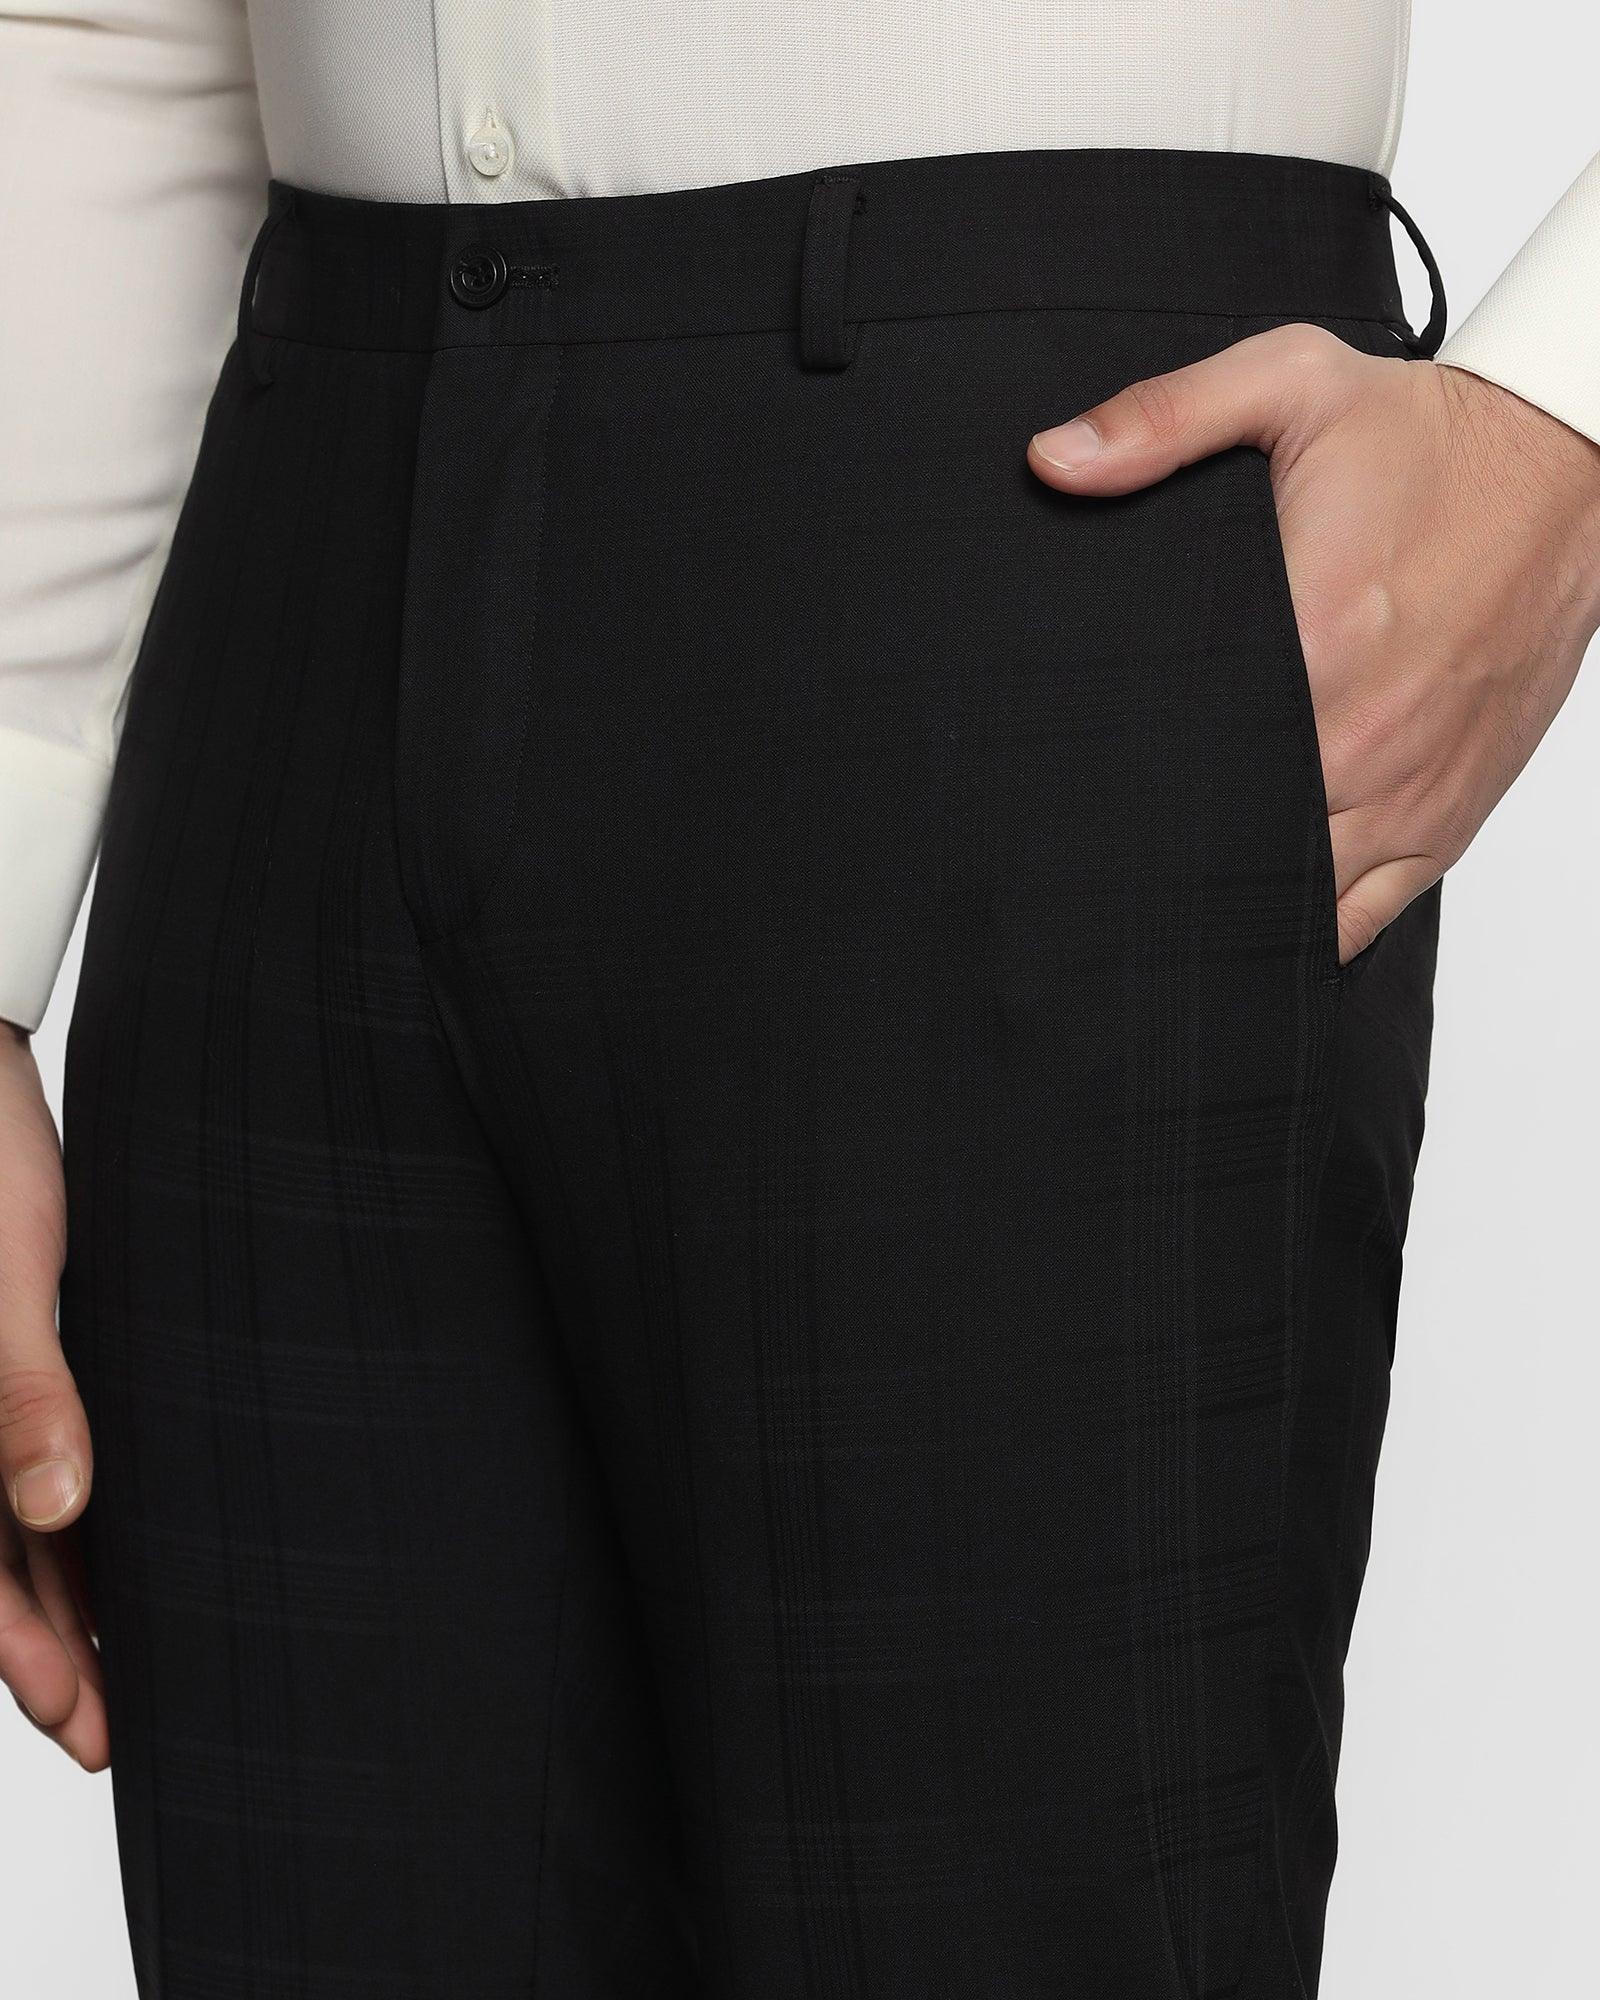 Luxe Slim Comfort B-95 Formal Black Check Trouser - Norm